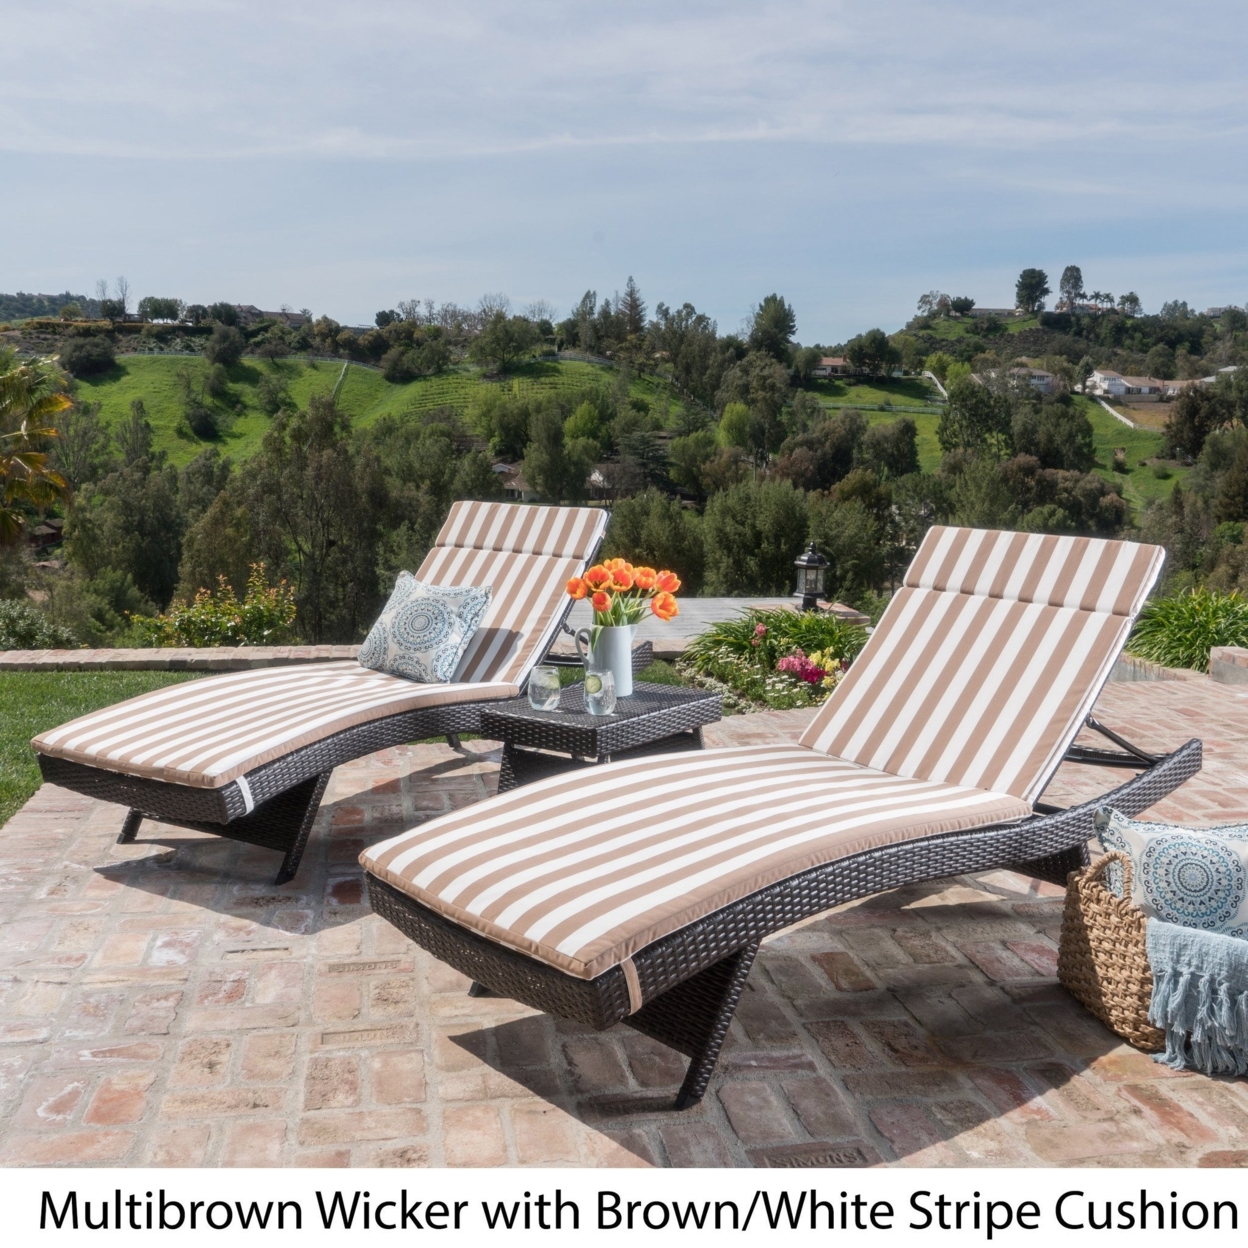 Lakeport 3pc Outdoor Wicker Chaise Lounge Chair & Table Set With Cushions - Beige Cushion, Gray